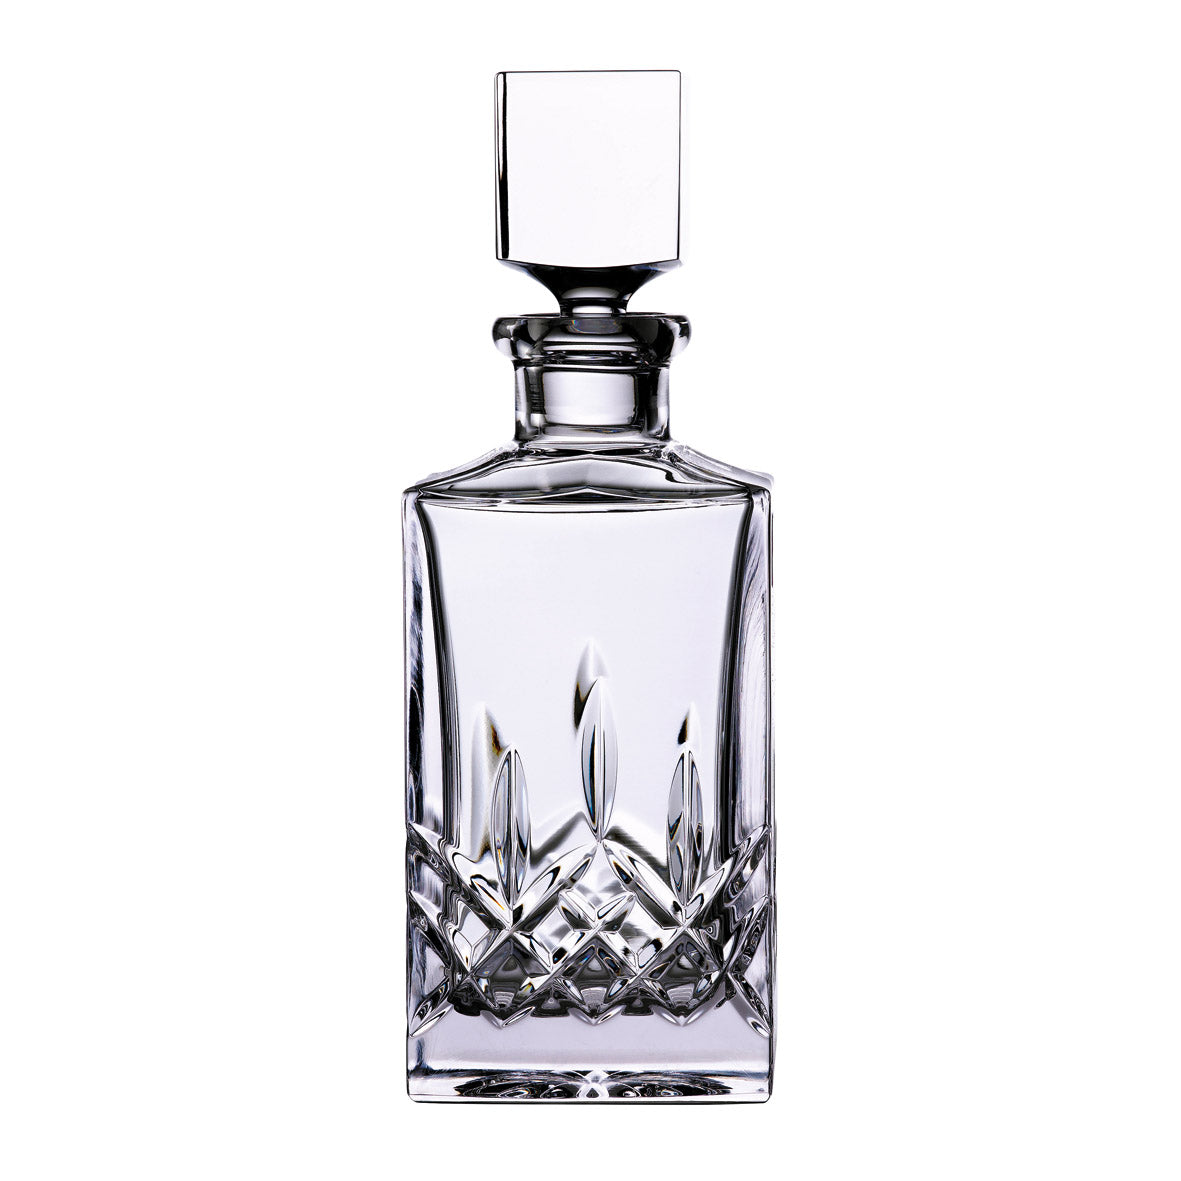 Waterord Crystal Lismore Square decanter